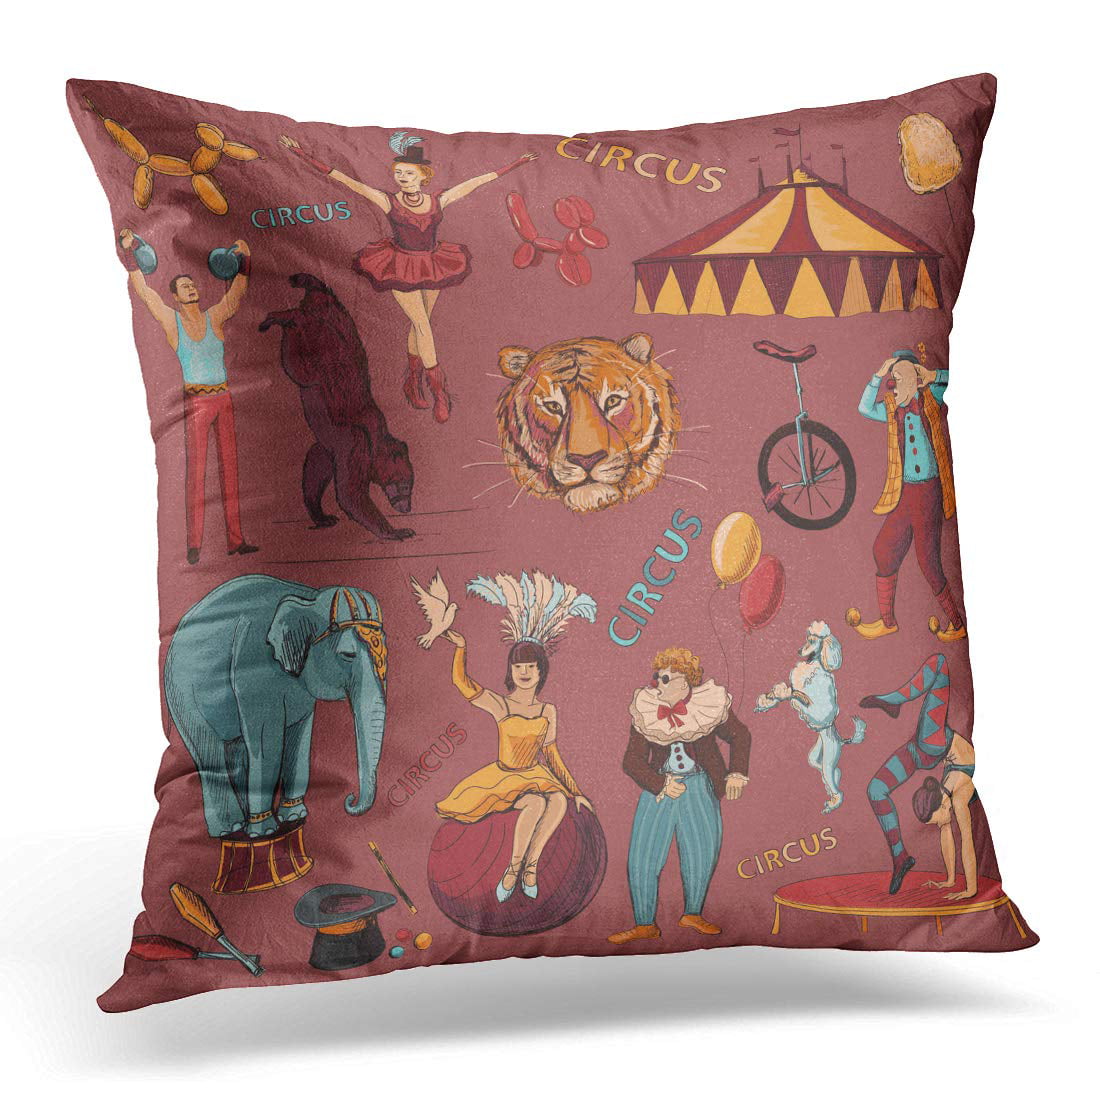 Circus Elephant Printed Cushion Covers Pillow Cases Home Decor or Inner 